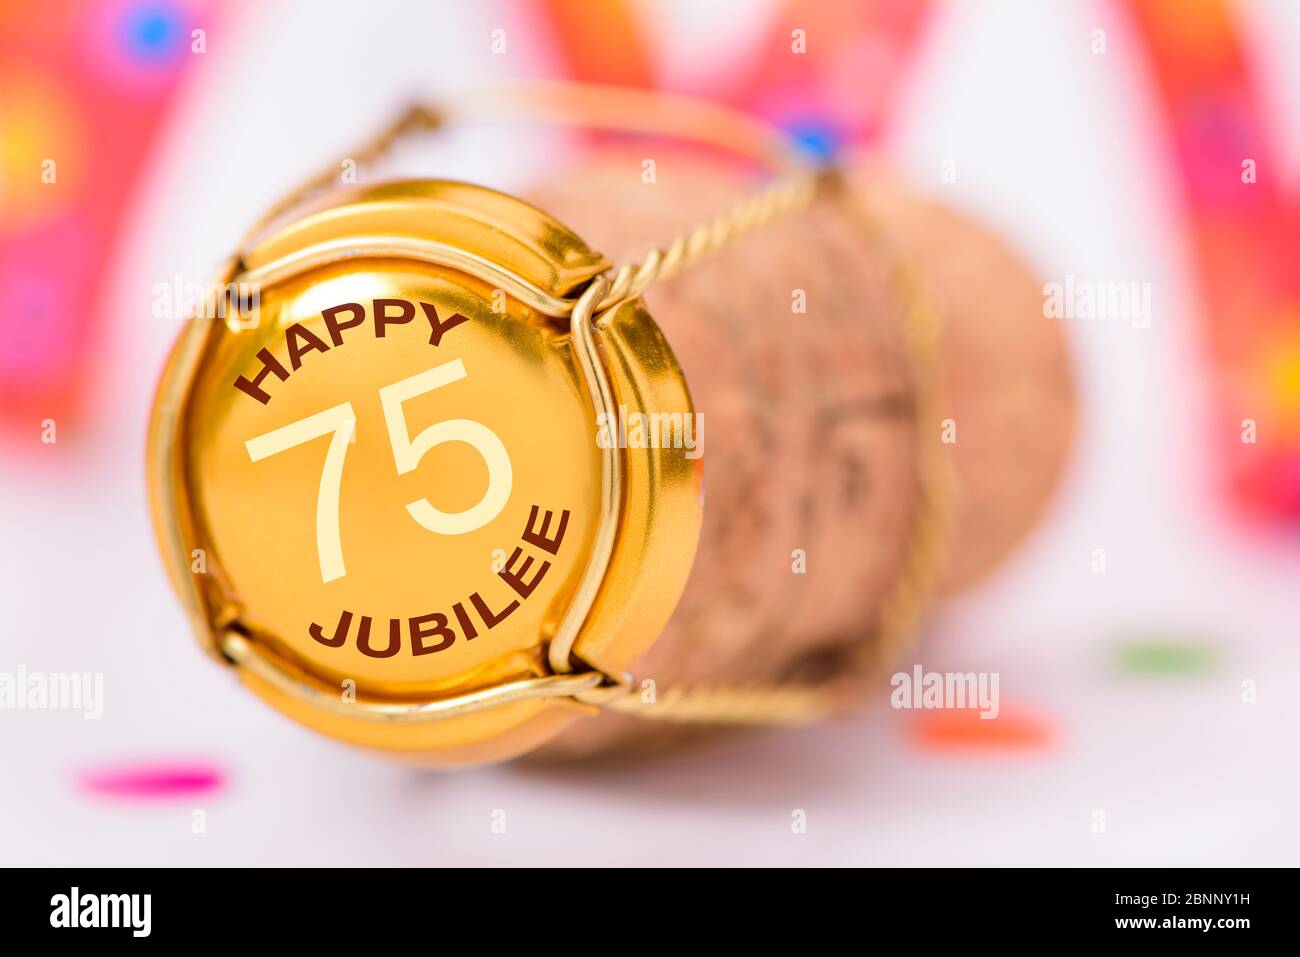 Congratulations on your 75th anniversary Stock Photo